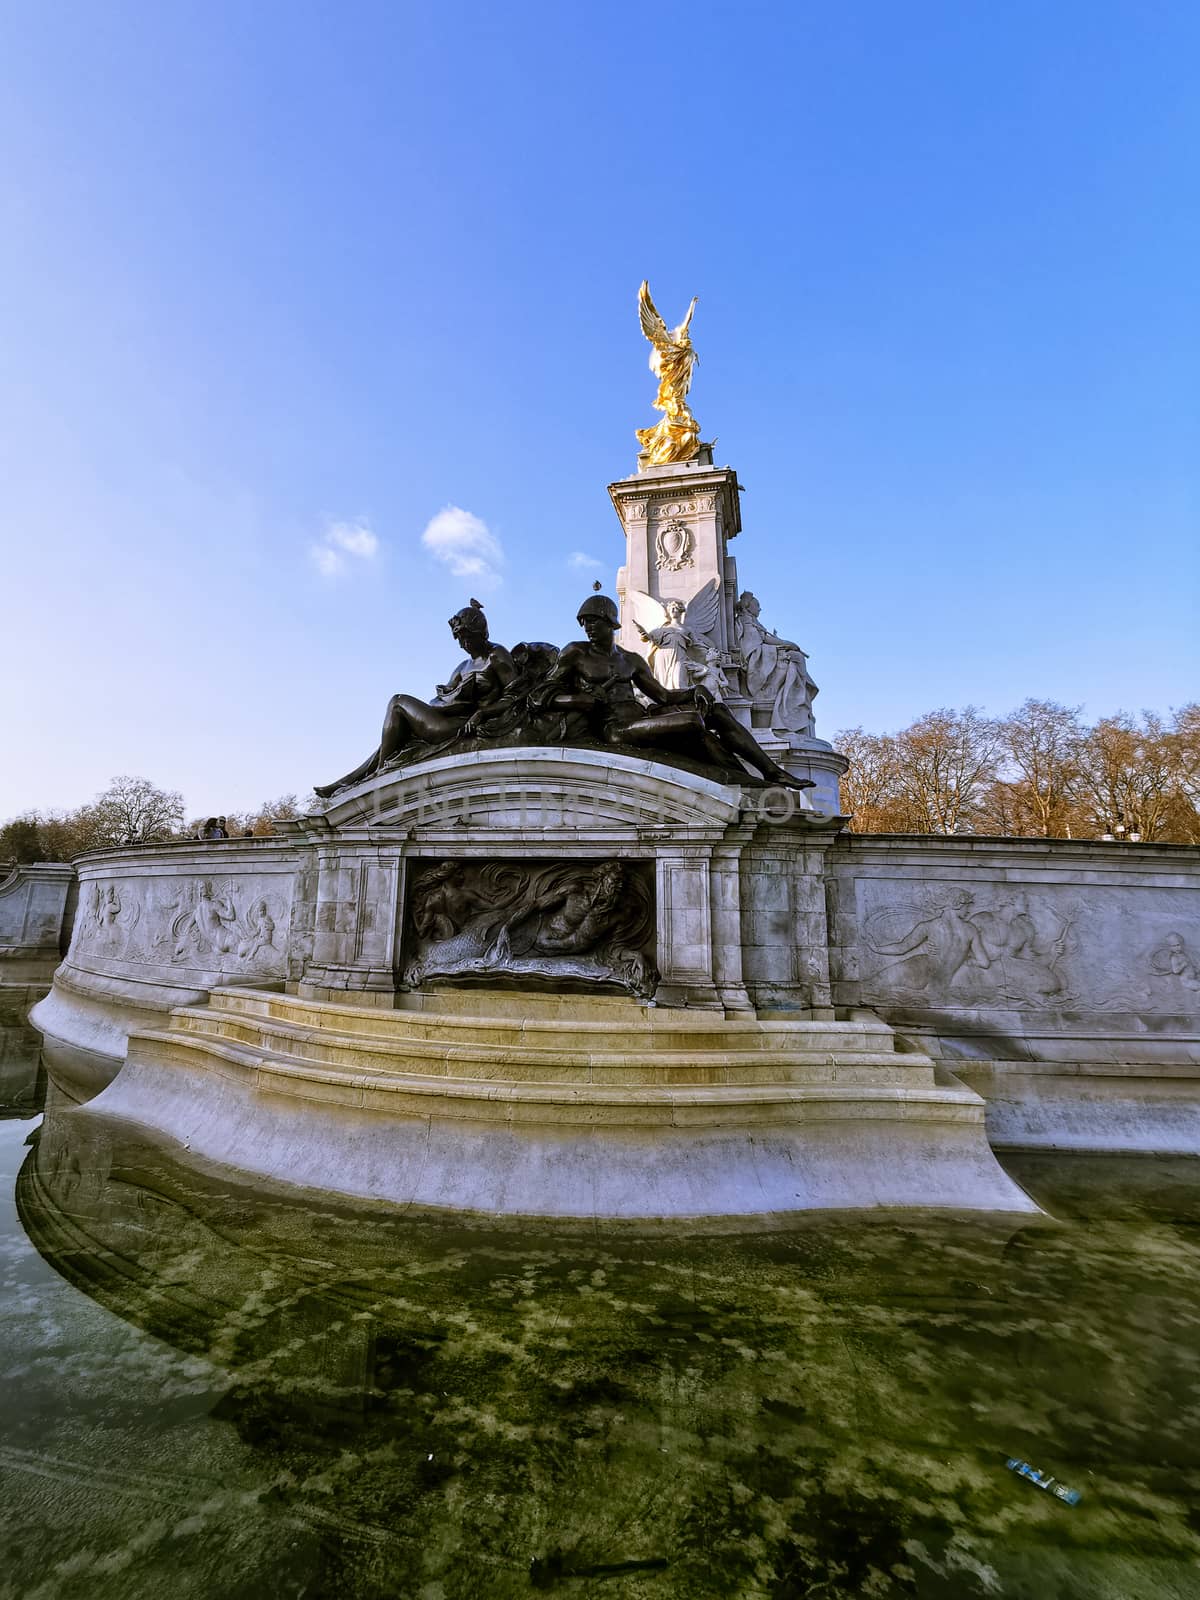 The Victoria Queen monument in front of Buckingham palace, London, England